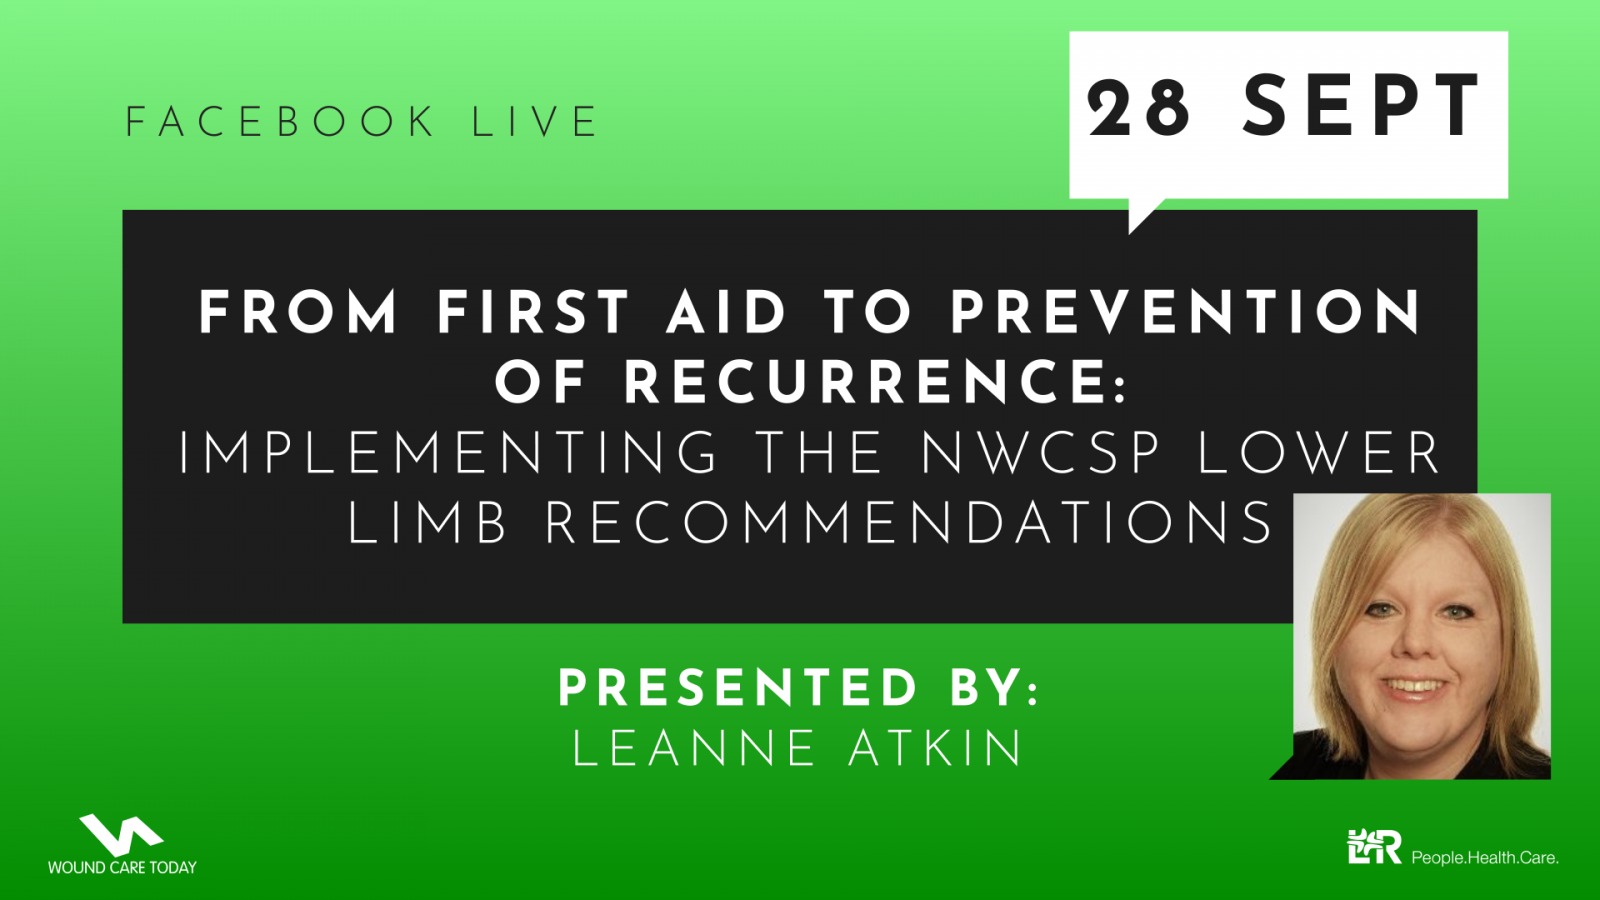 From first aid to prevention of recurrence: implementing the NWCSP lower limb recommendations